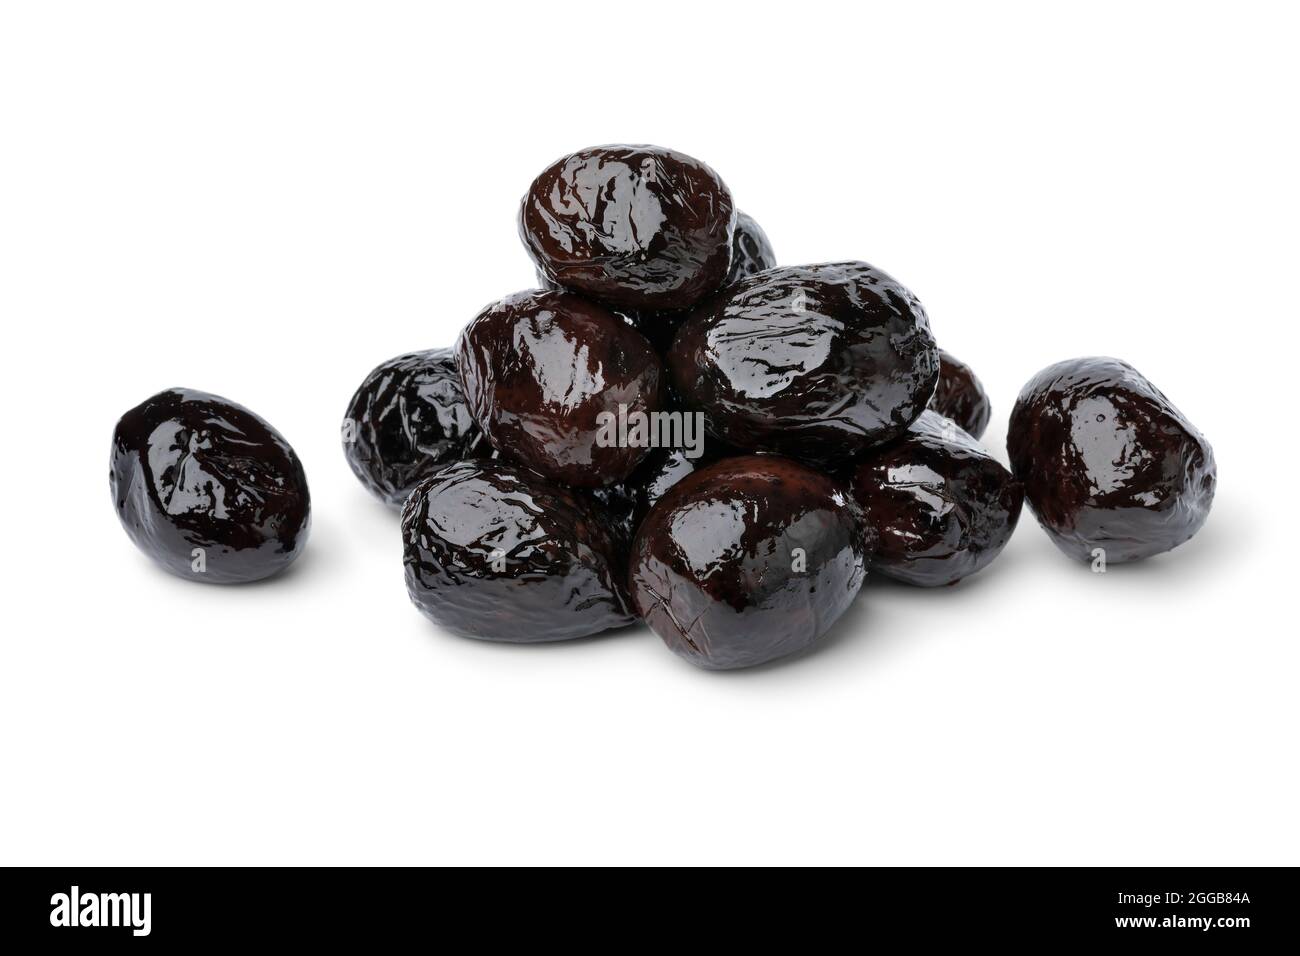 Heap of traditional Moroccan black breakfast olives close up isolated on white background Stock Photo